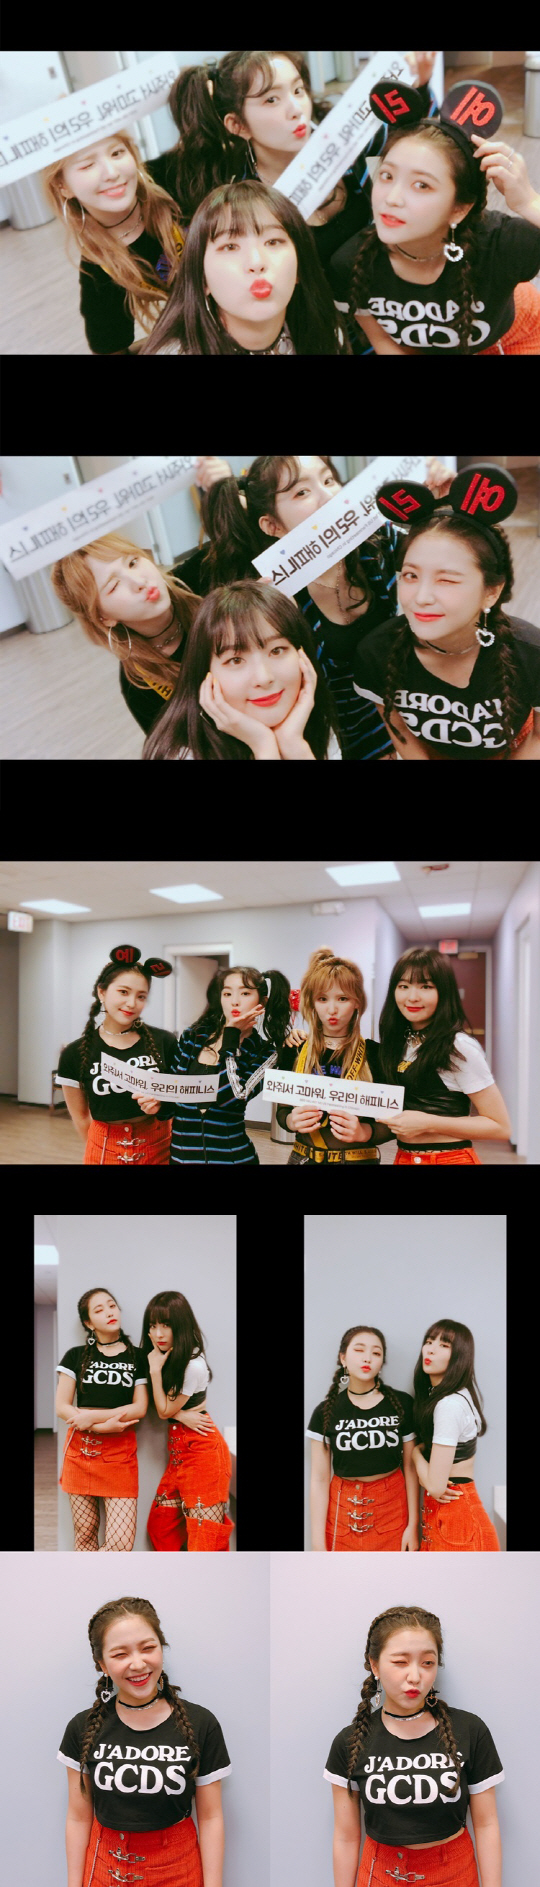 Red Velvet told the official SNS on Thursday: The hour with our Red Velvet fans was amazing; thank you for making unforgettable memories.I love you all, Zoe loves you.The two members of the photo, along with the article Yeri Seulgi in Chicago , are also adding pictures of two people. The members of Red Velvet (Yeri Irene Wendy Seulgi) are radiating their lovely youthful fruity beauty. ting